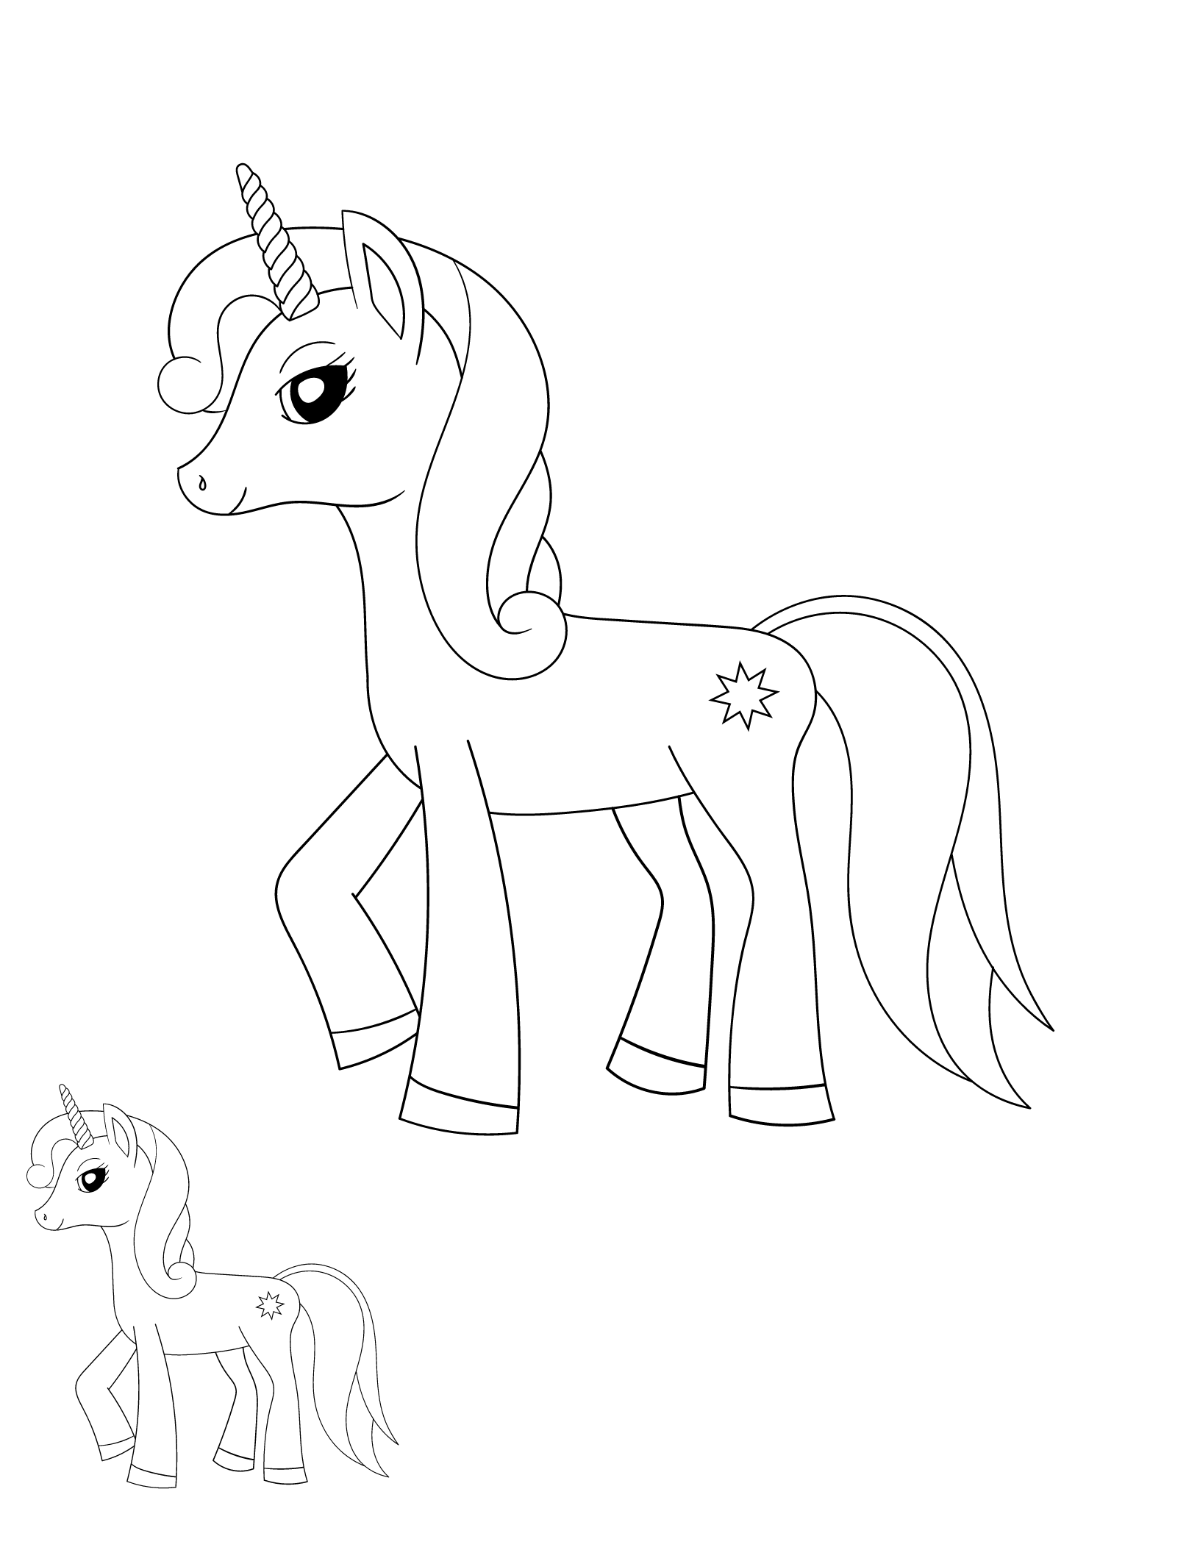 Pony Unicorn Coloring Page Template